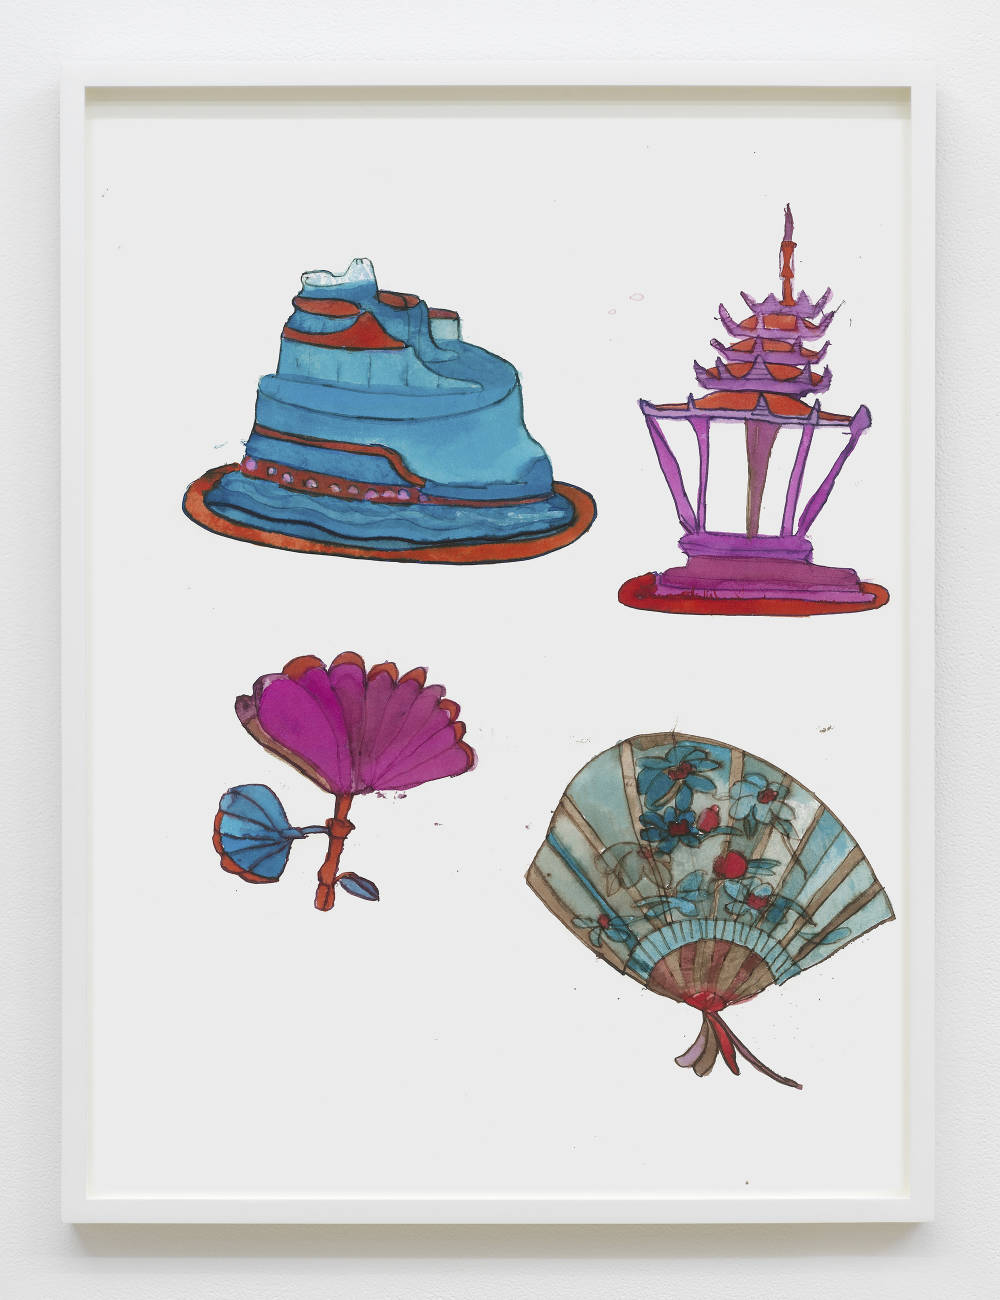 Image of an ink drawing on paper by Christine Rebet depicting four objects against a white background rendered in blue and purple ink. These objects appear to be interpretations of a flowering plant, a traditional hand fan, and a mountain temple. 